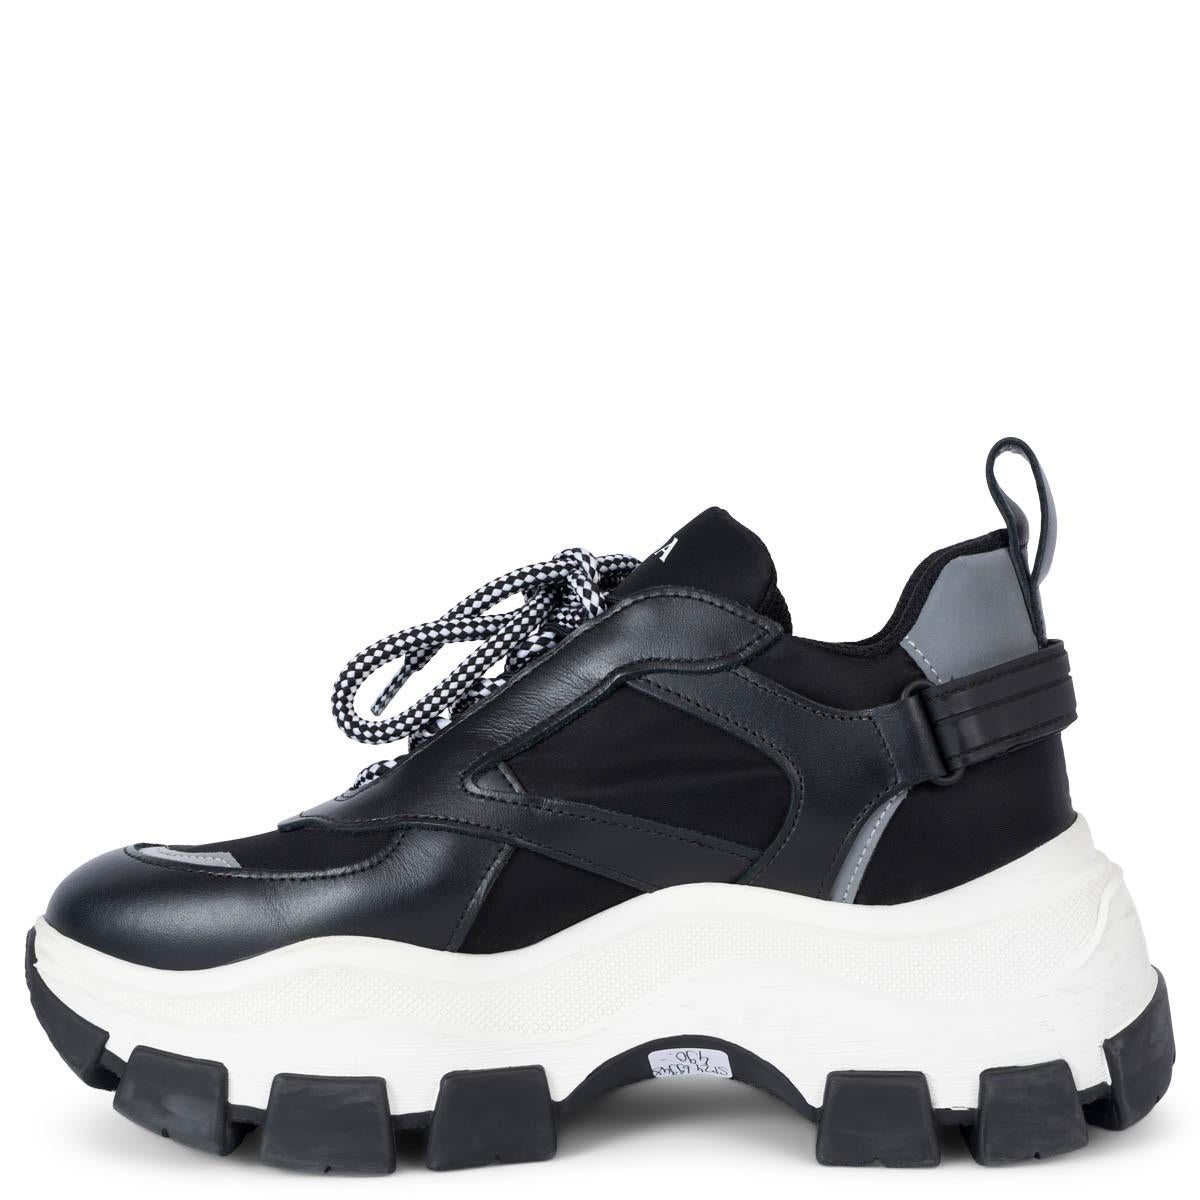 PRADA black & white PEGASUS PLATFORM Sneakers Shoes 38.5 In Excellent Condition For Sale In Zürich, CH